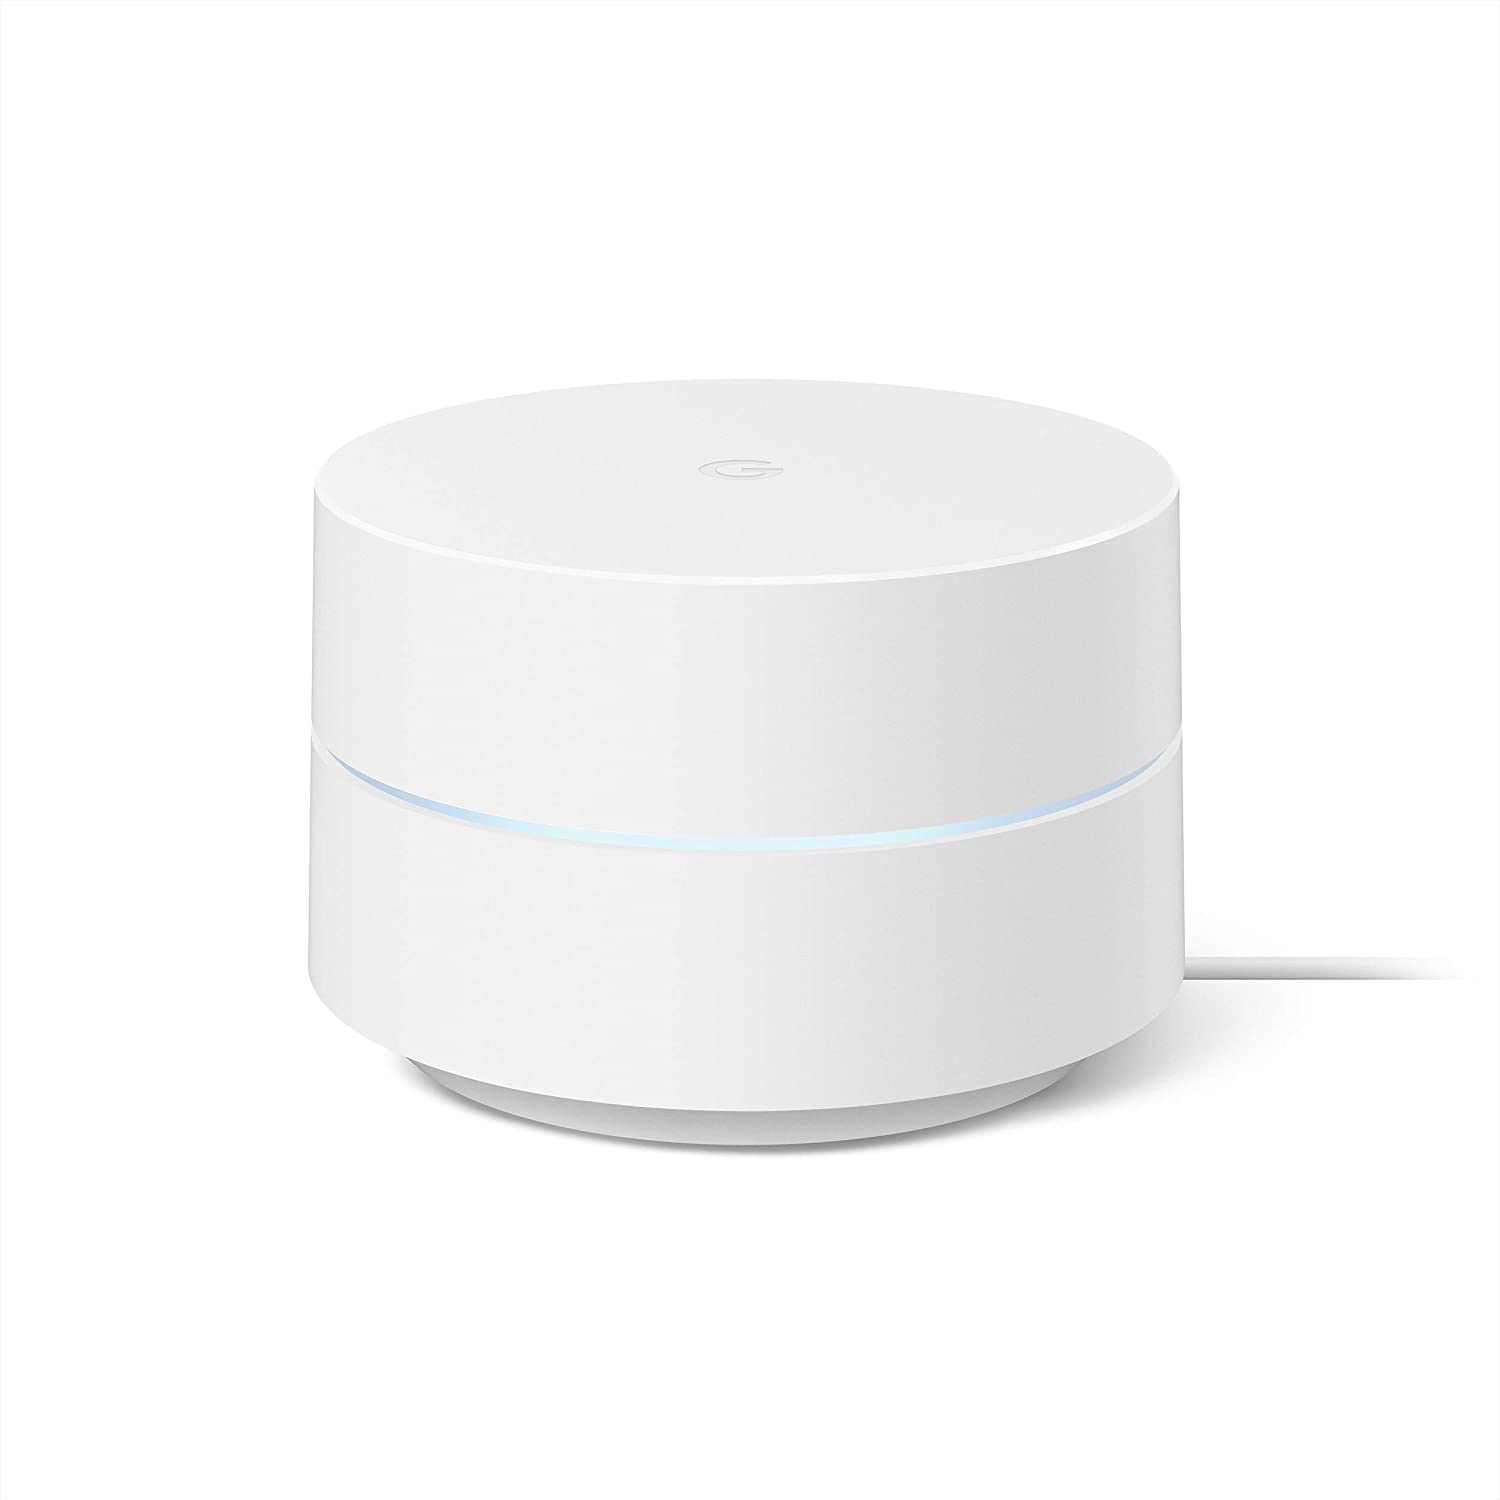 Google Wifi Router up to 1500sq feet Coverage with Control Feature